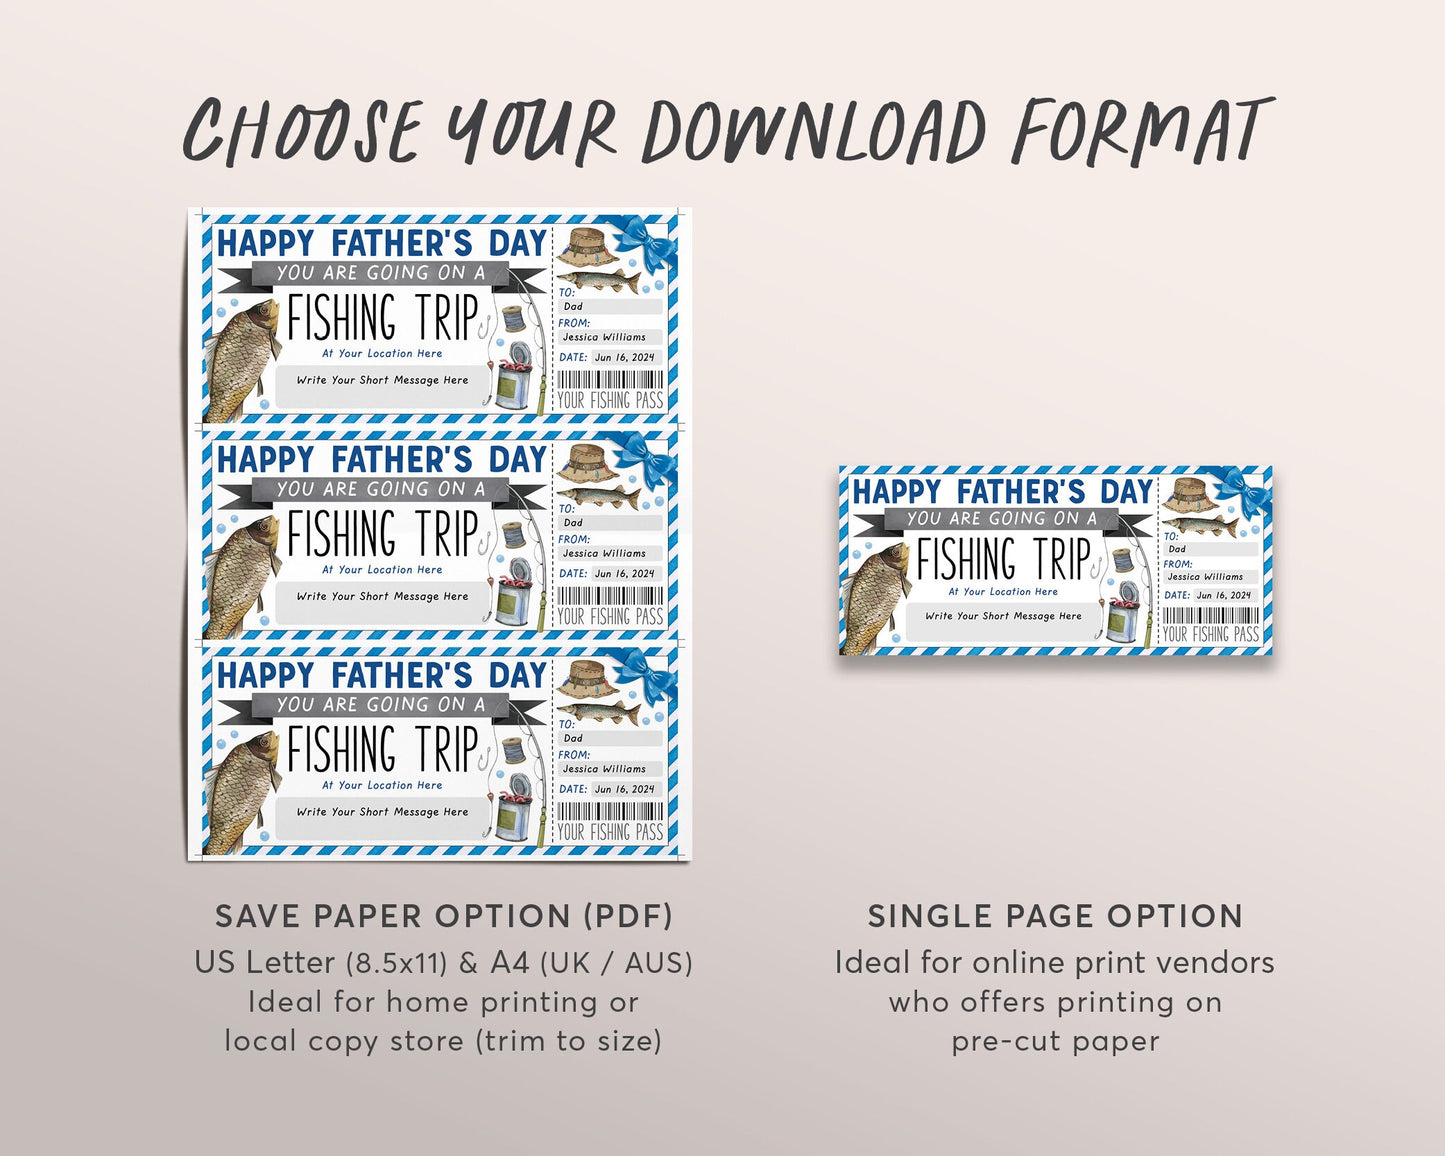 Father's Day Retirement Fishing Trip Ticket Editable Template, Fishing Trip Reveal Gift Certificate For Dad, Fishing Day Trip Voucher Coupon